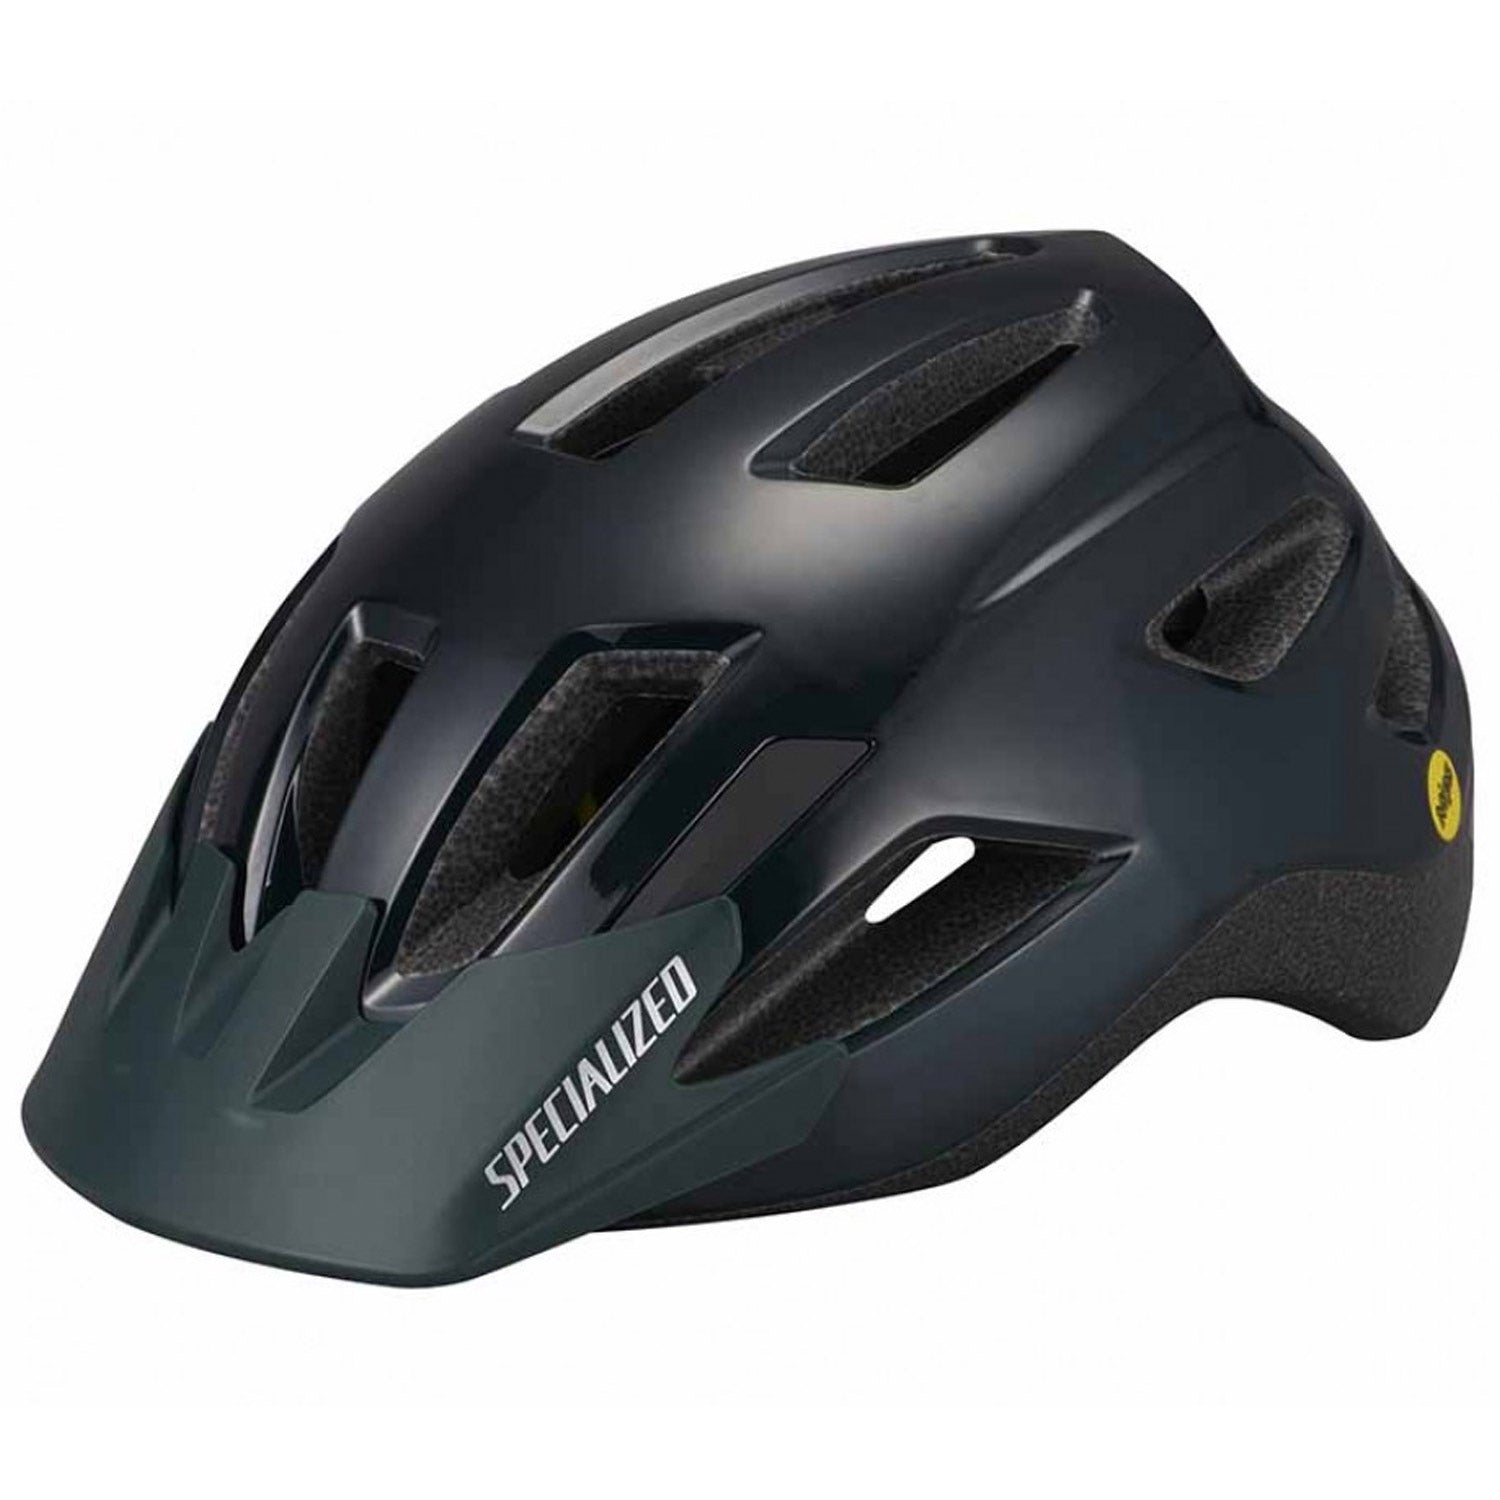 Specialized Shuffle Led SB Mips helmet - Green | All4cycling